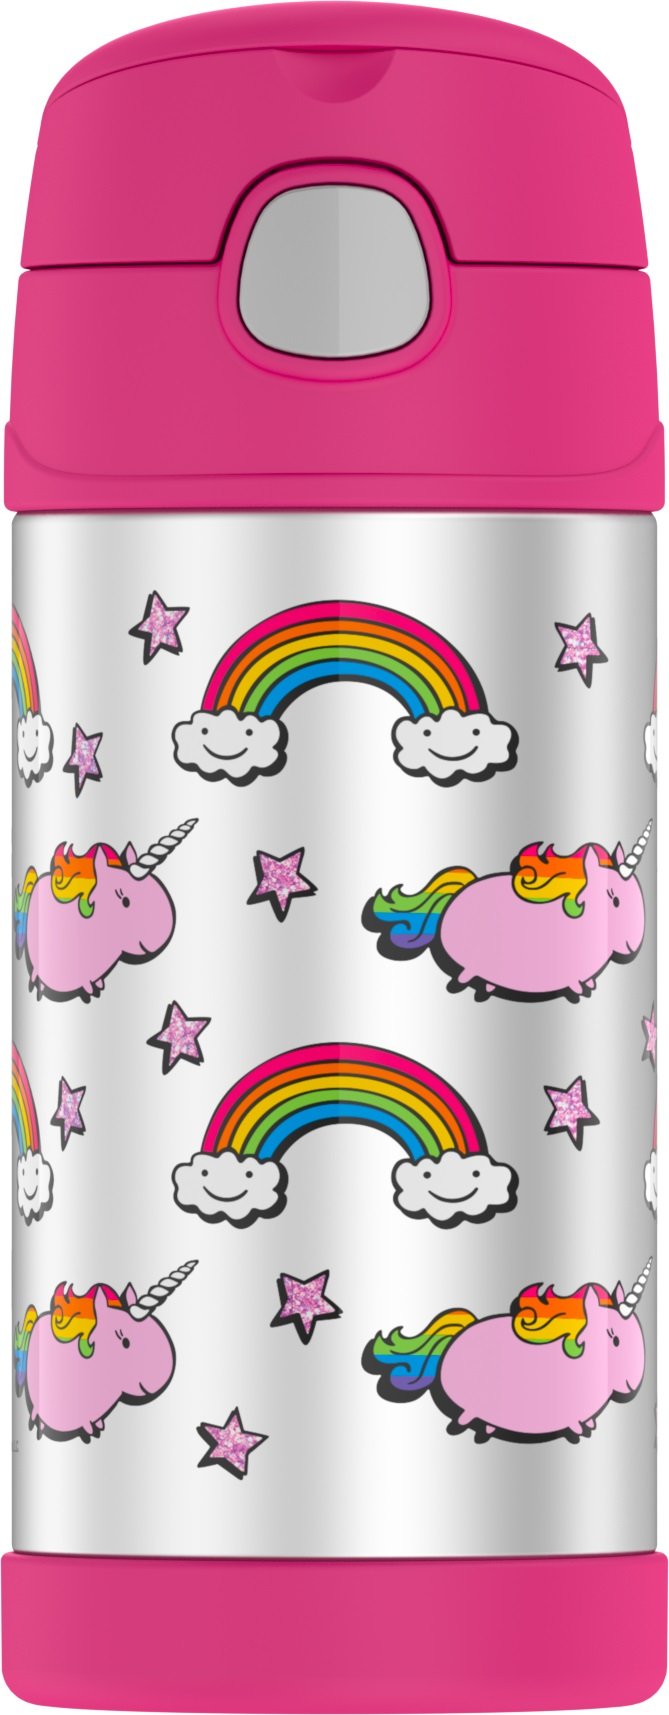 Book Cover Thermos Funtainer 12 Ounce Bottle, Fat Unicorn 12 Ounce Fat Unicorn